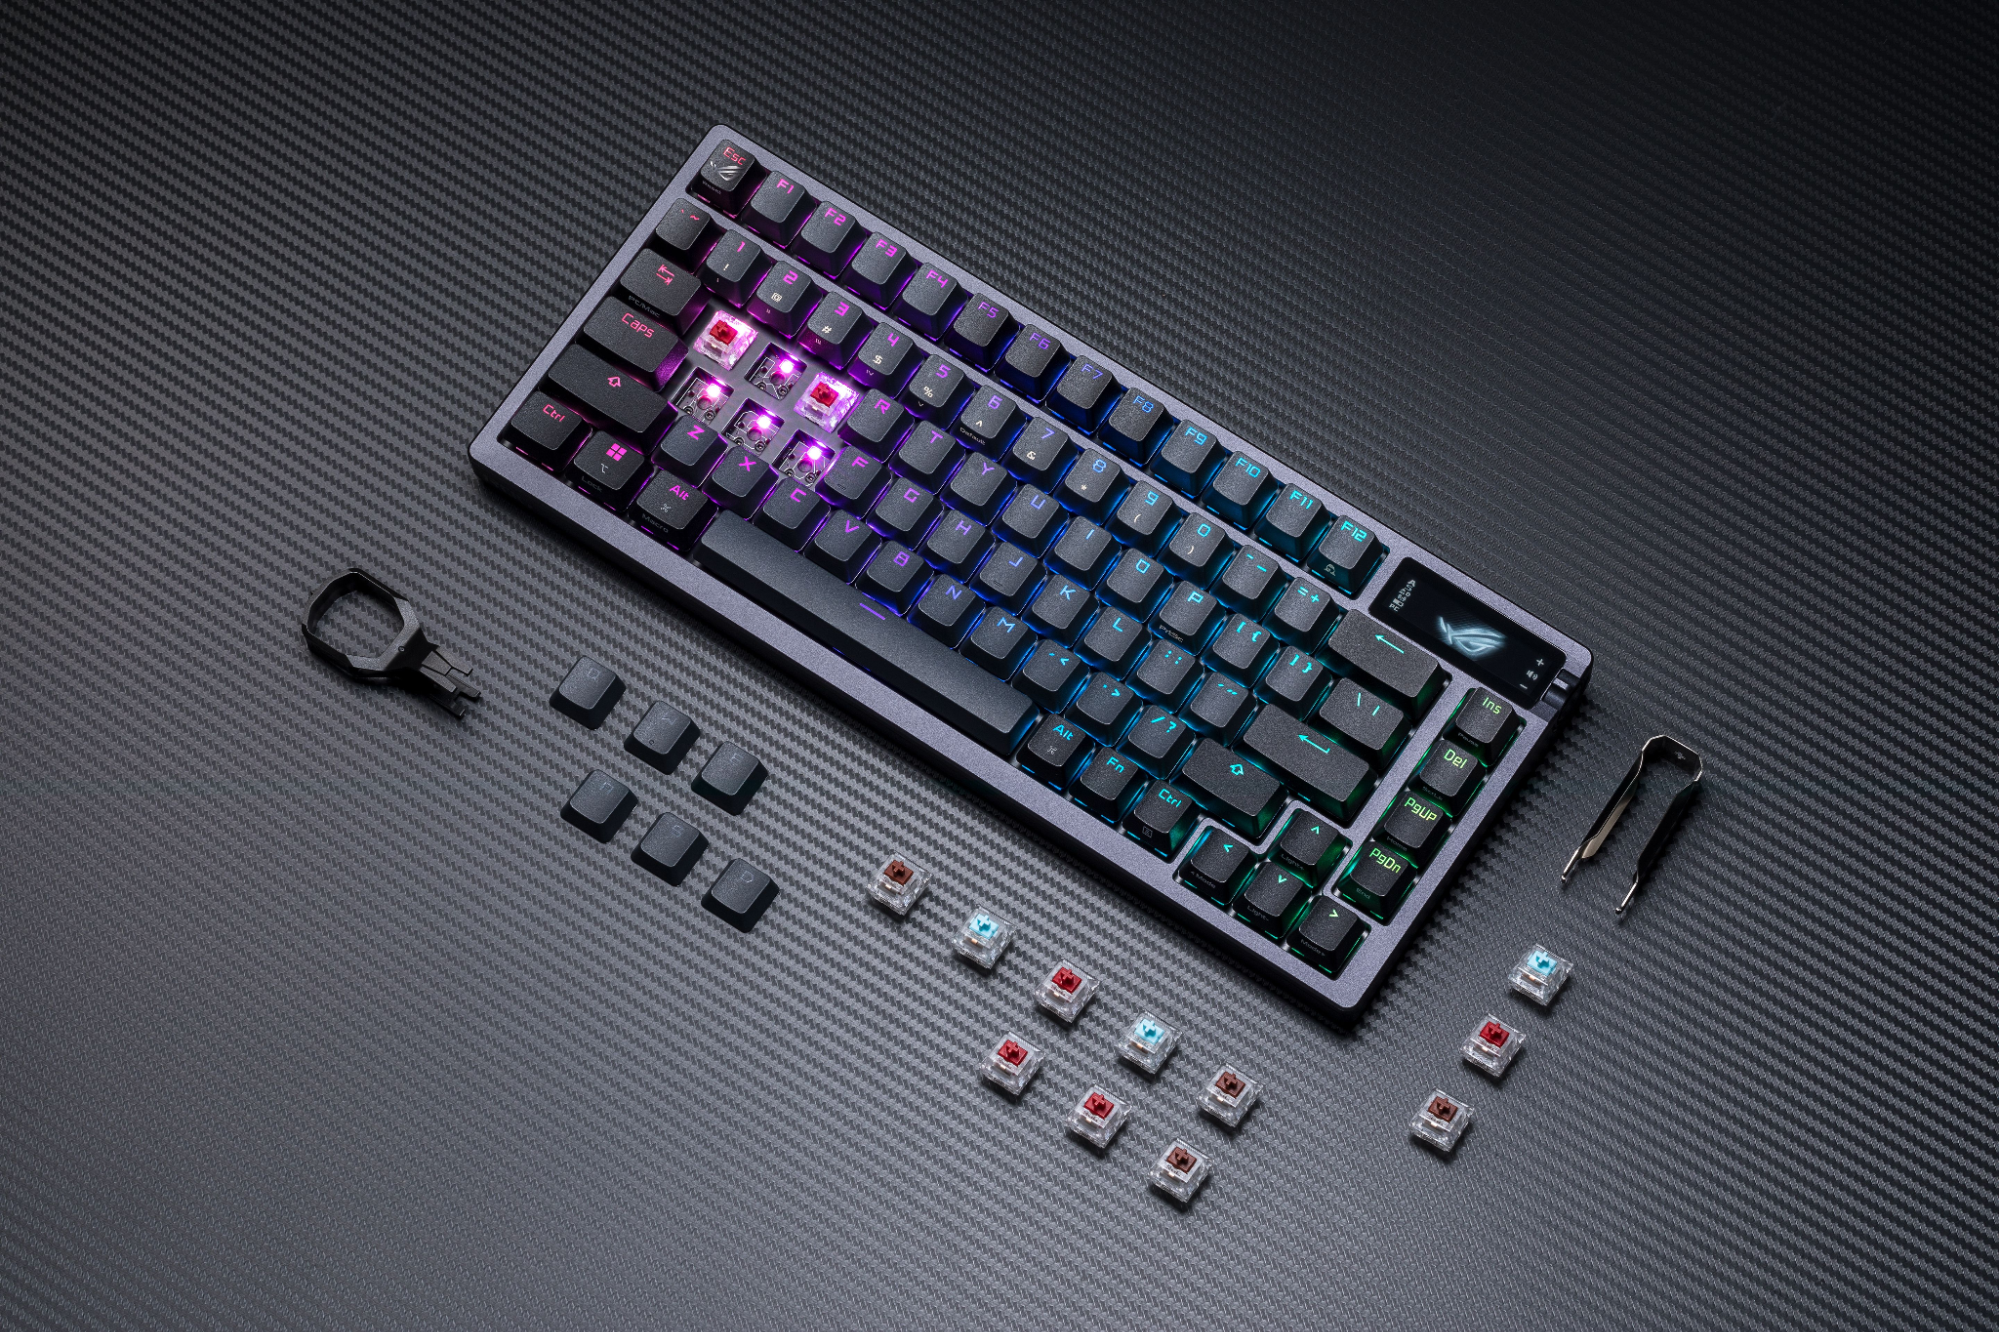 ASUS ROG Azoth wireless keyboard with extra switches and keycaps arranged around the keyboard